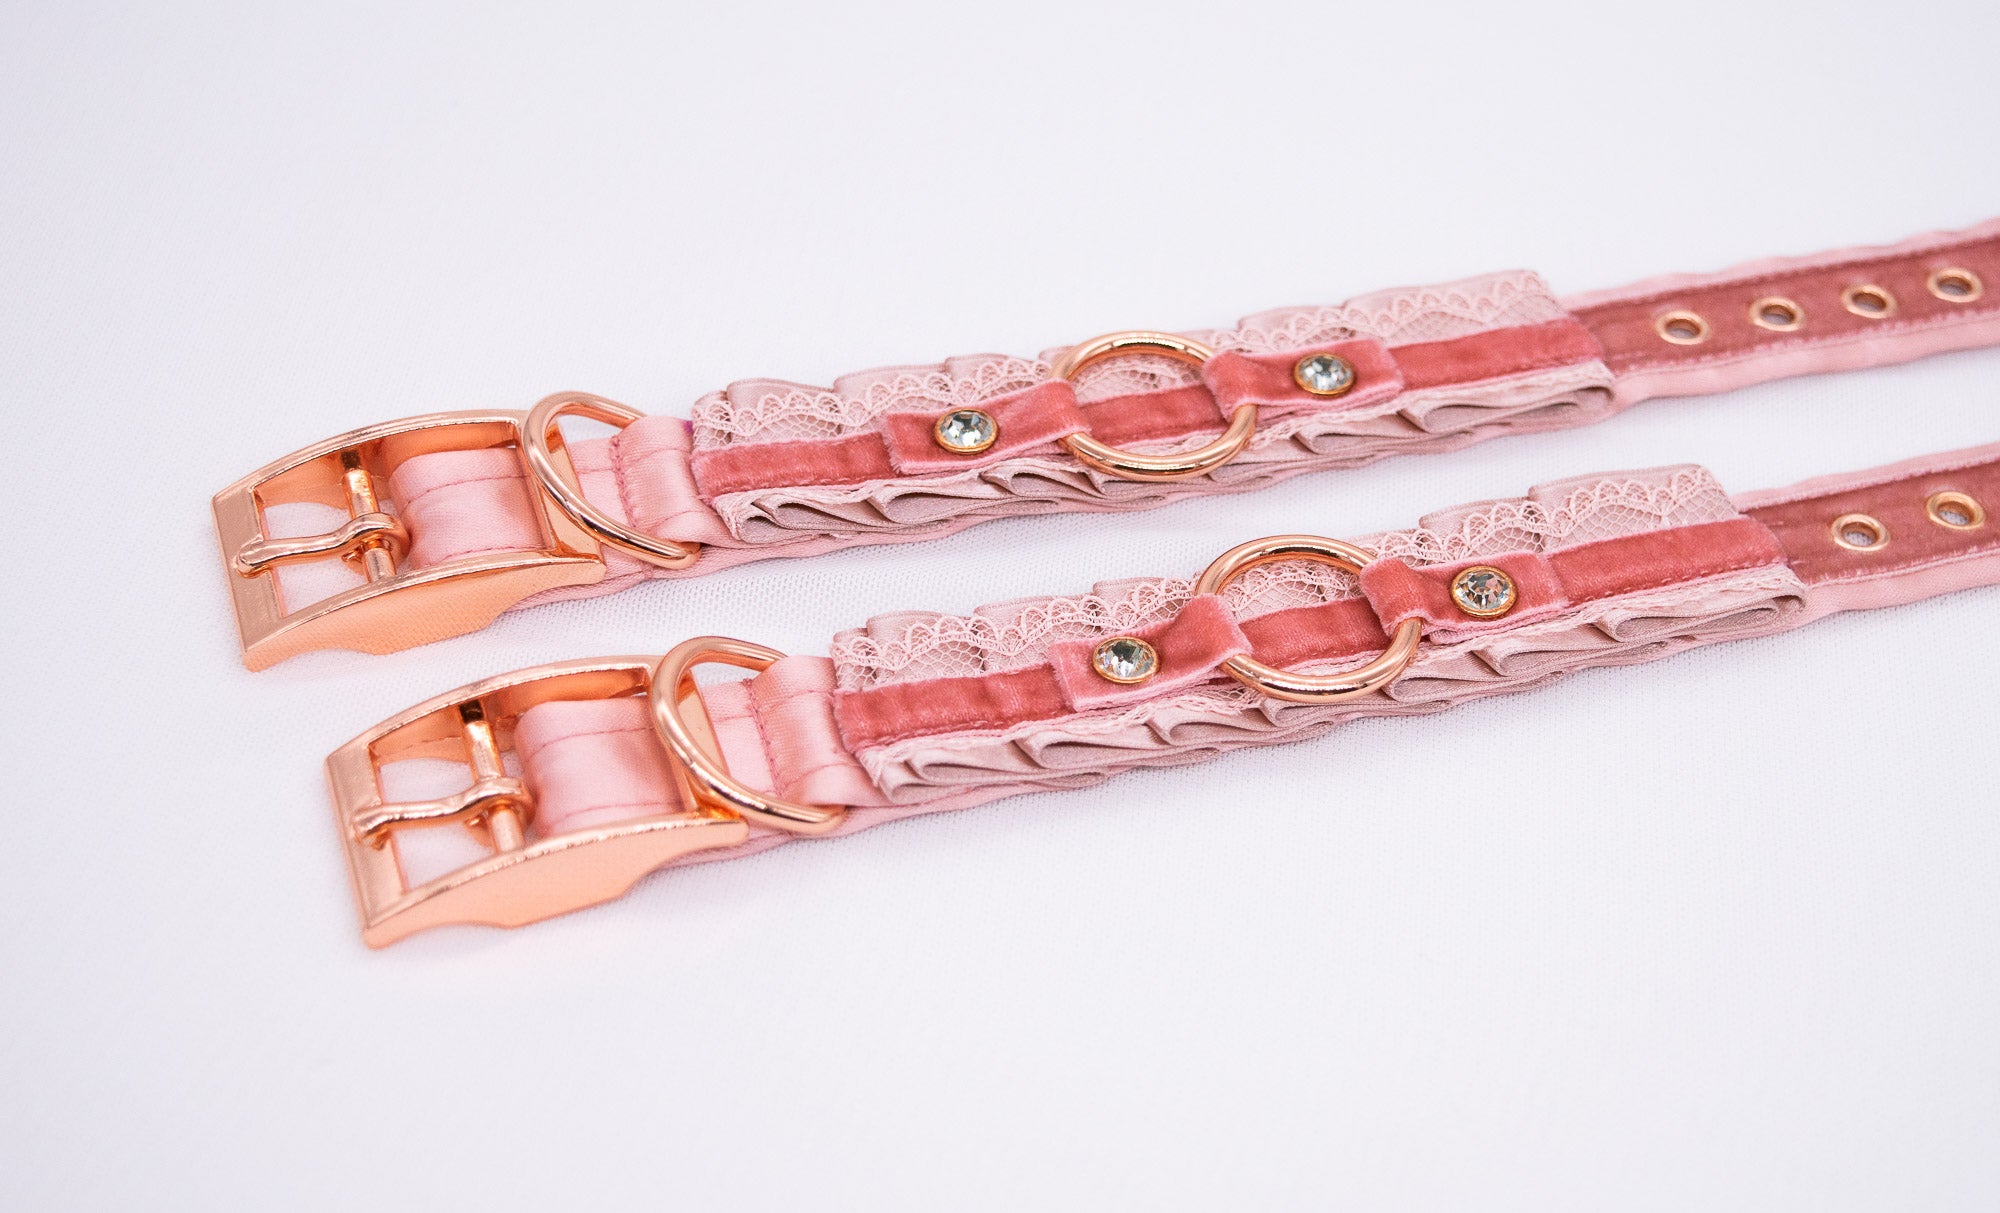 Dusty Rose, Blush Velvet and Lace - Rose Gold BDSM Cuffs